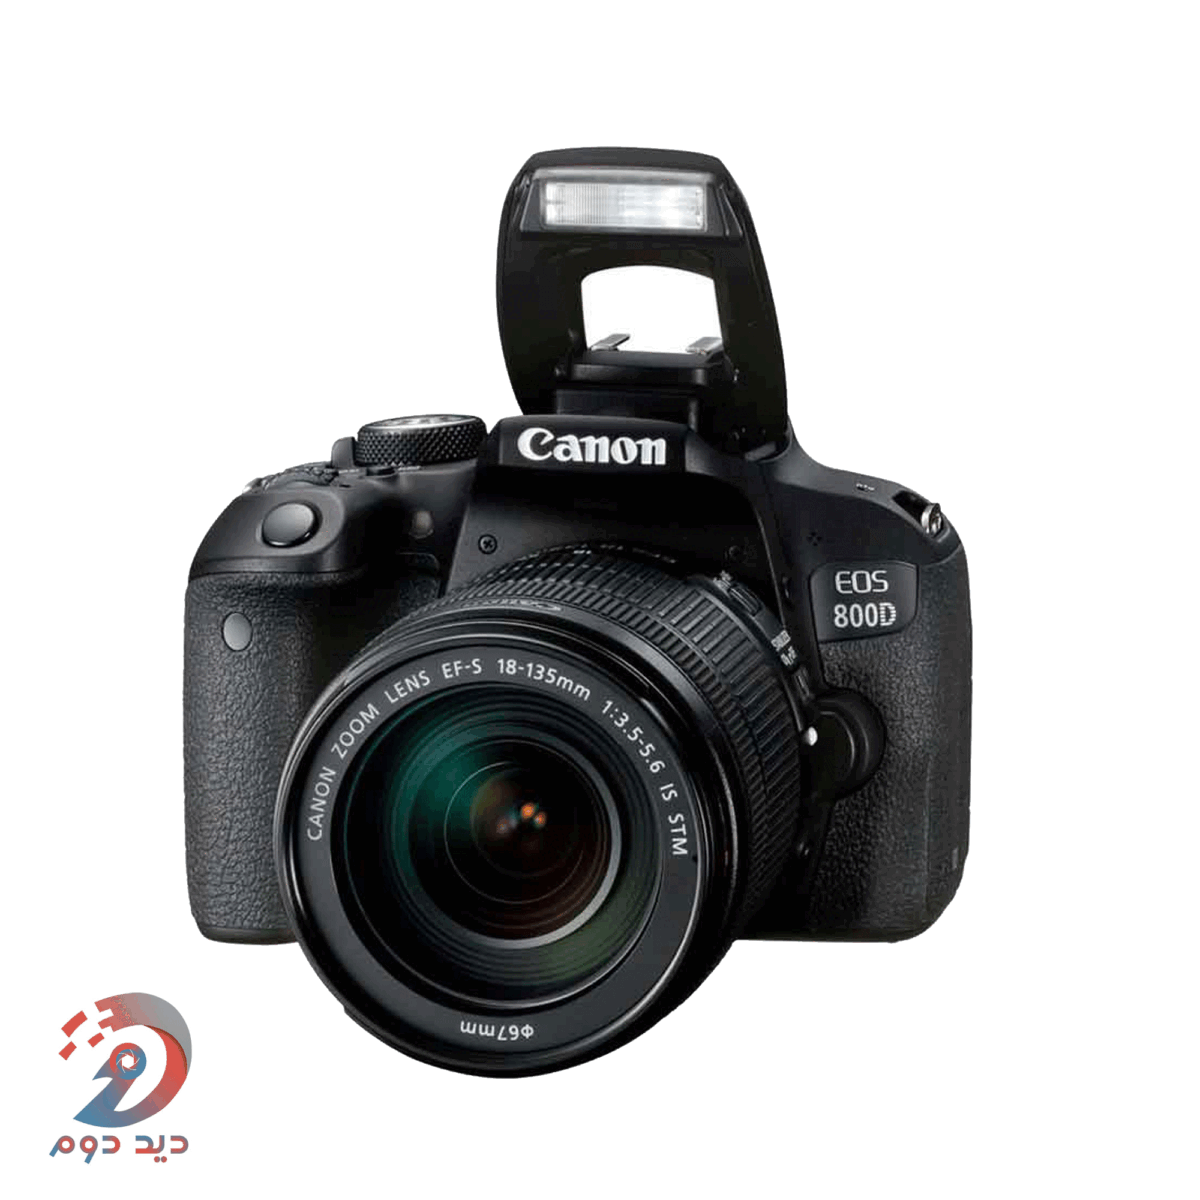 Canon-EOS-800D-Kit-18-135mm-f3.5-5.6-IS-STM